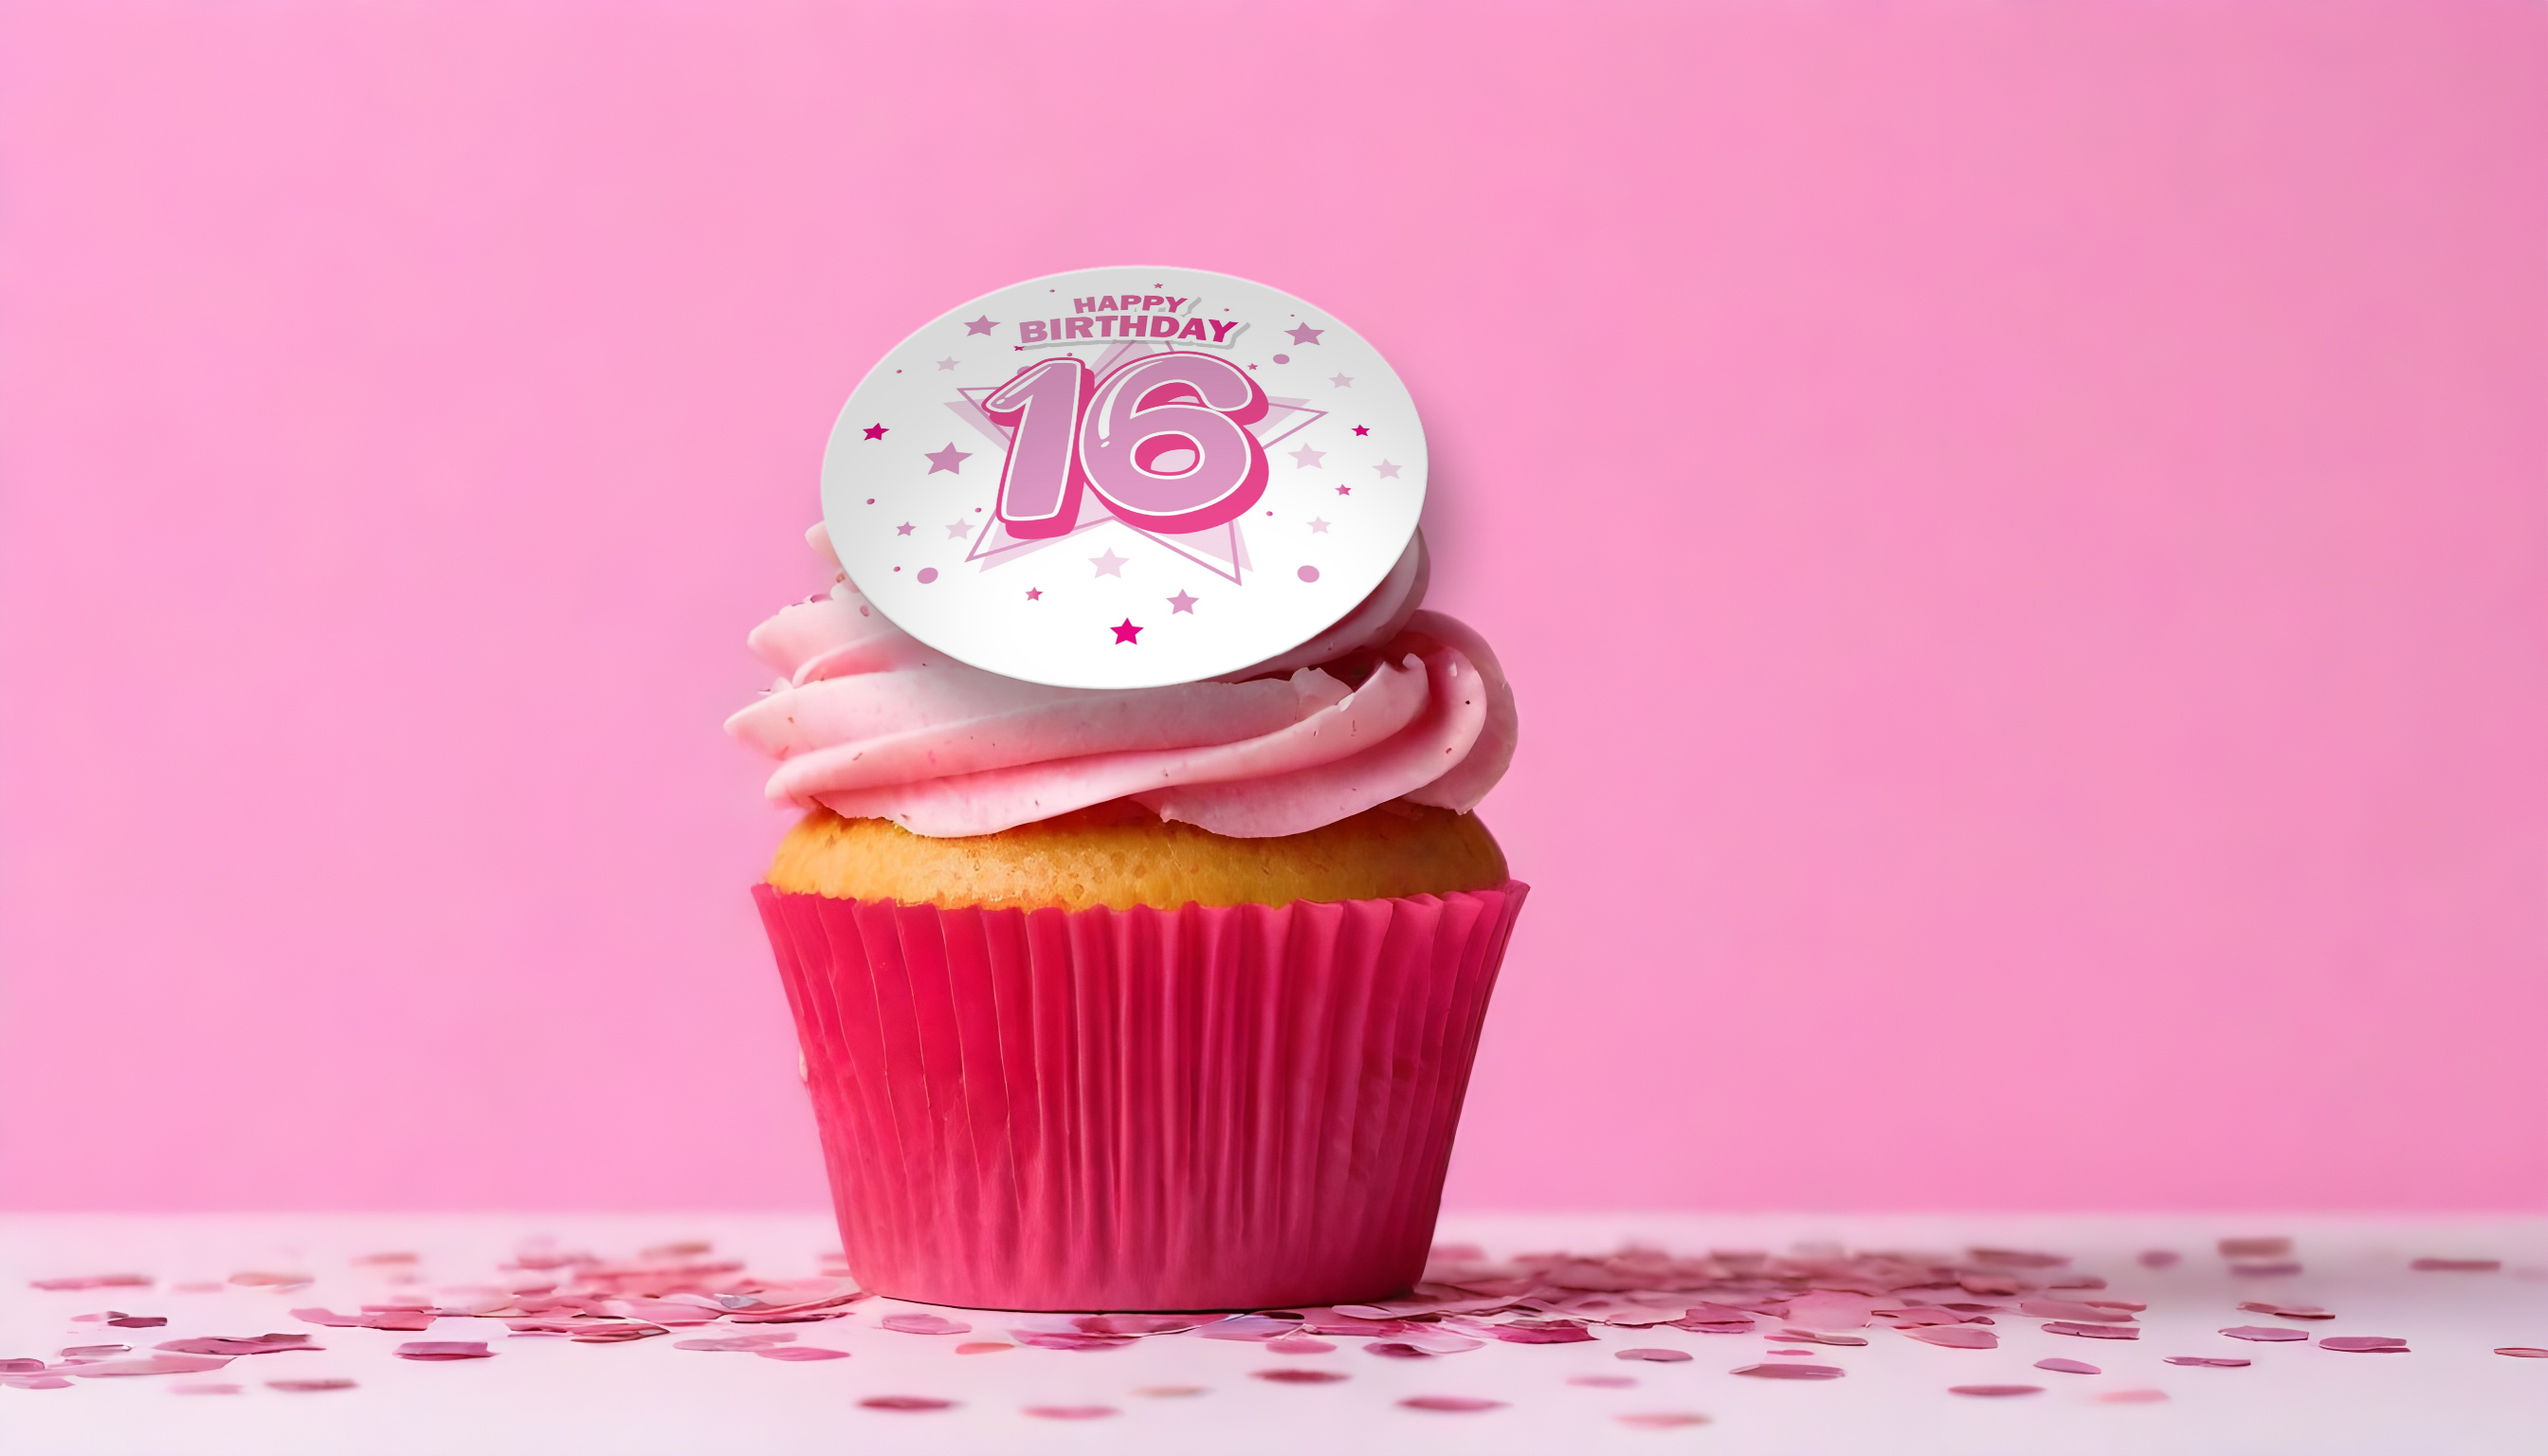 Happy 16th birthday cupcake with printed edible cupcake topper